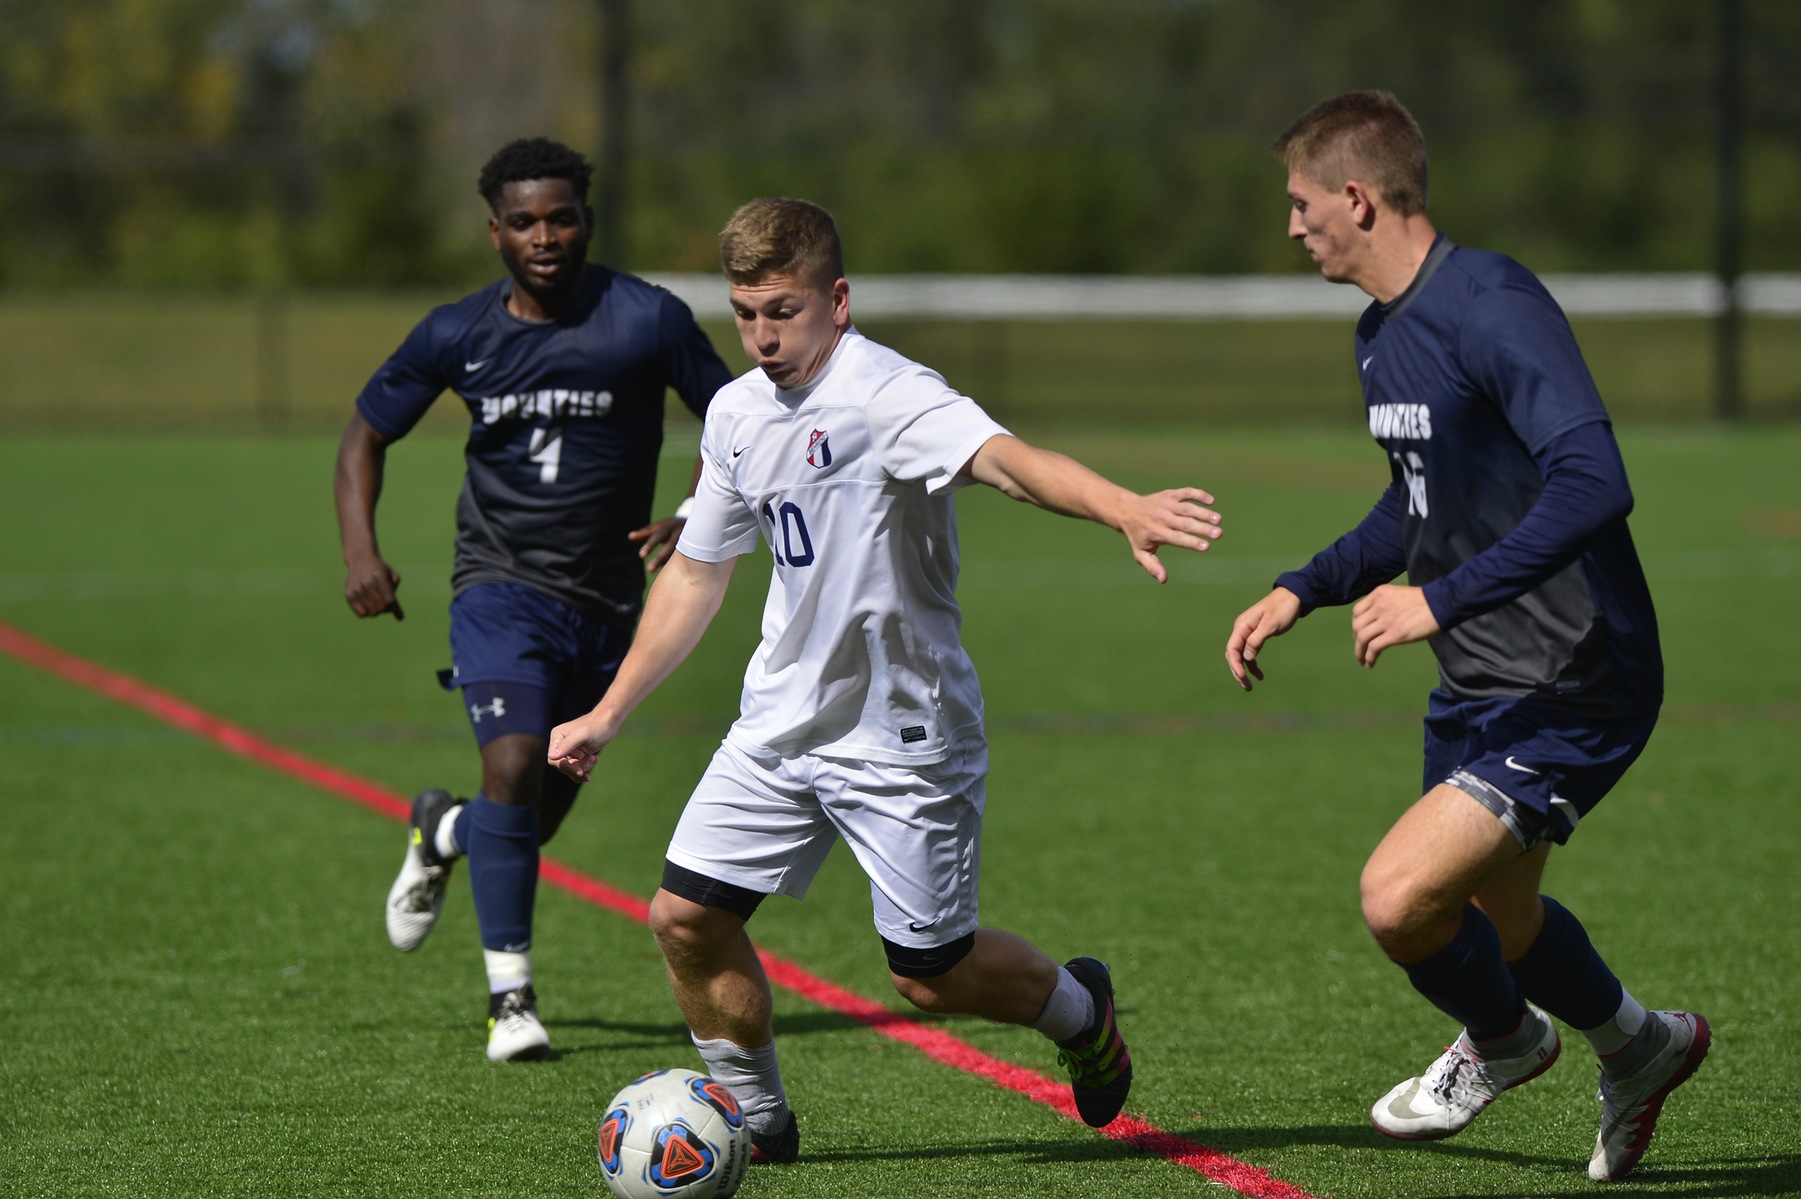 Men's Soccer Falls To Grove City in Final Seconds